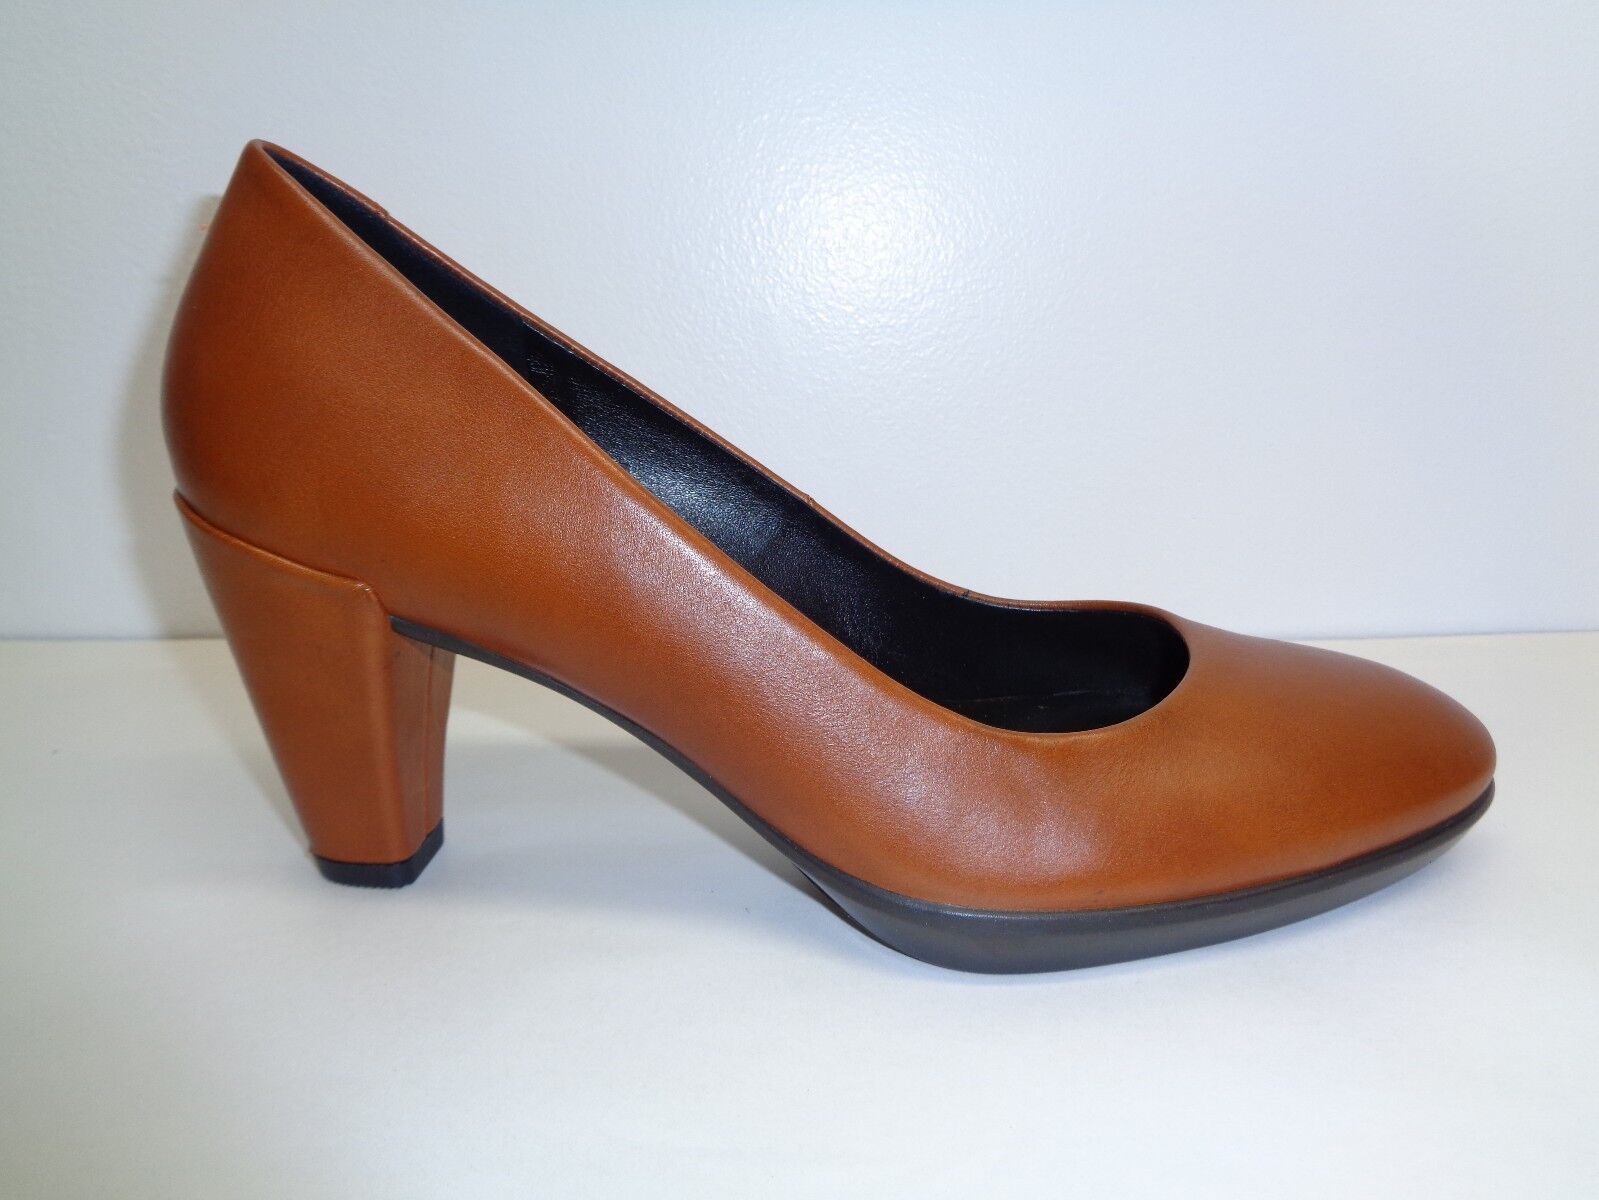 Primary image for Ecco Size 5 to 5.5 Eur 36 SHAPE 55 Brown Leather Heels Pumps New Womens Shoes